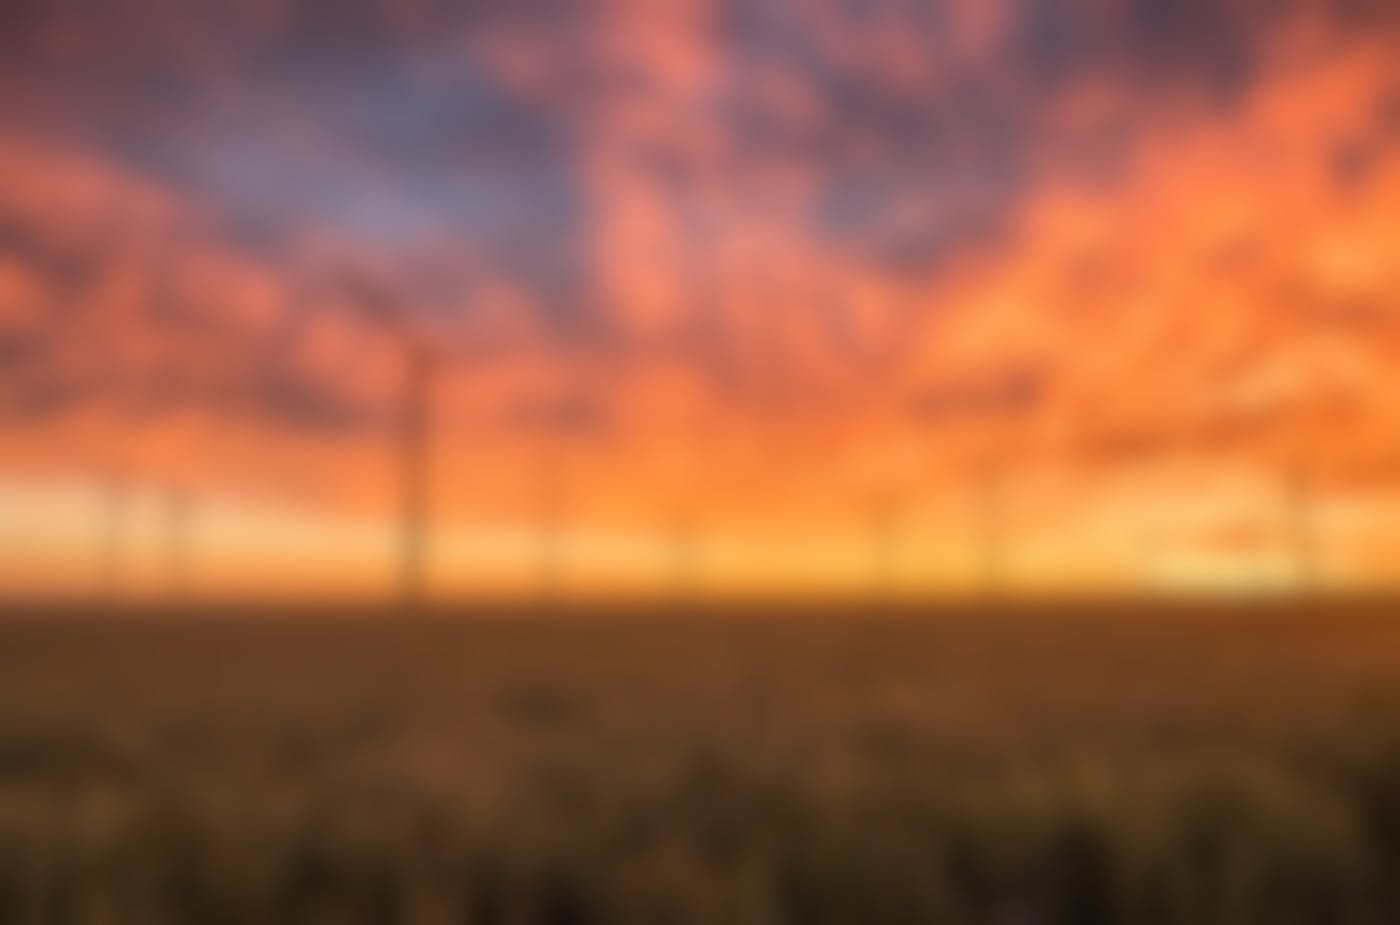 Wind turbines in a wheat field at sunset